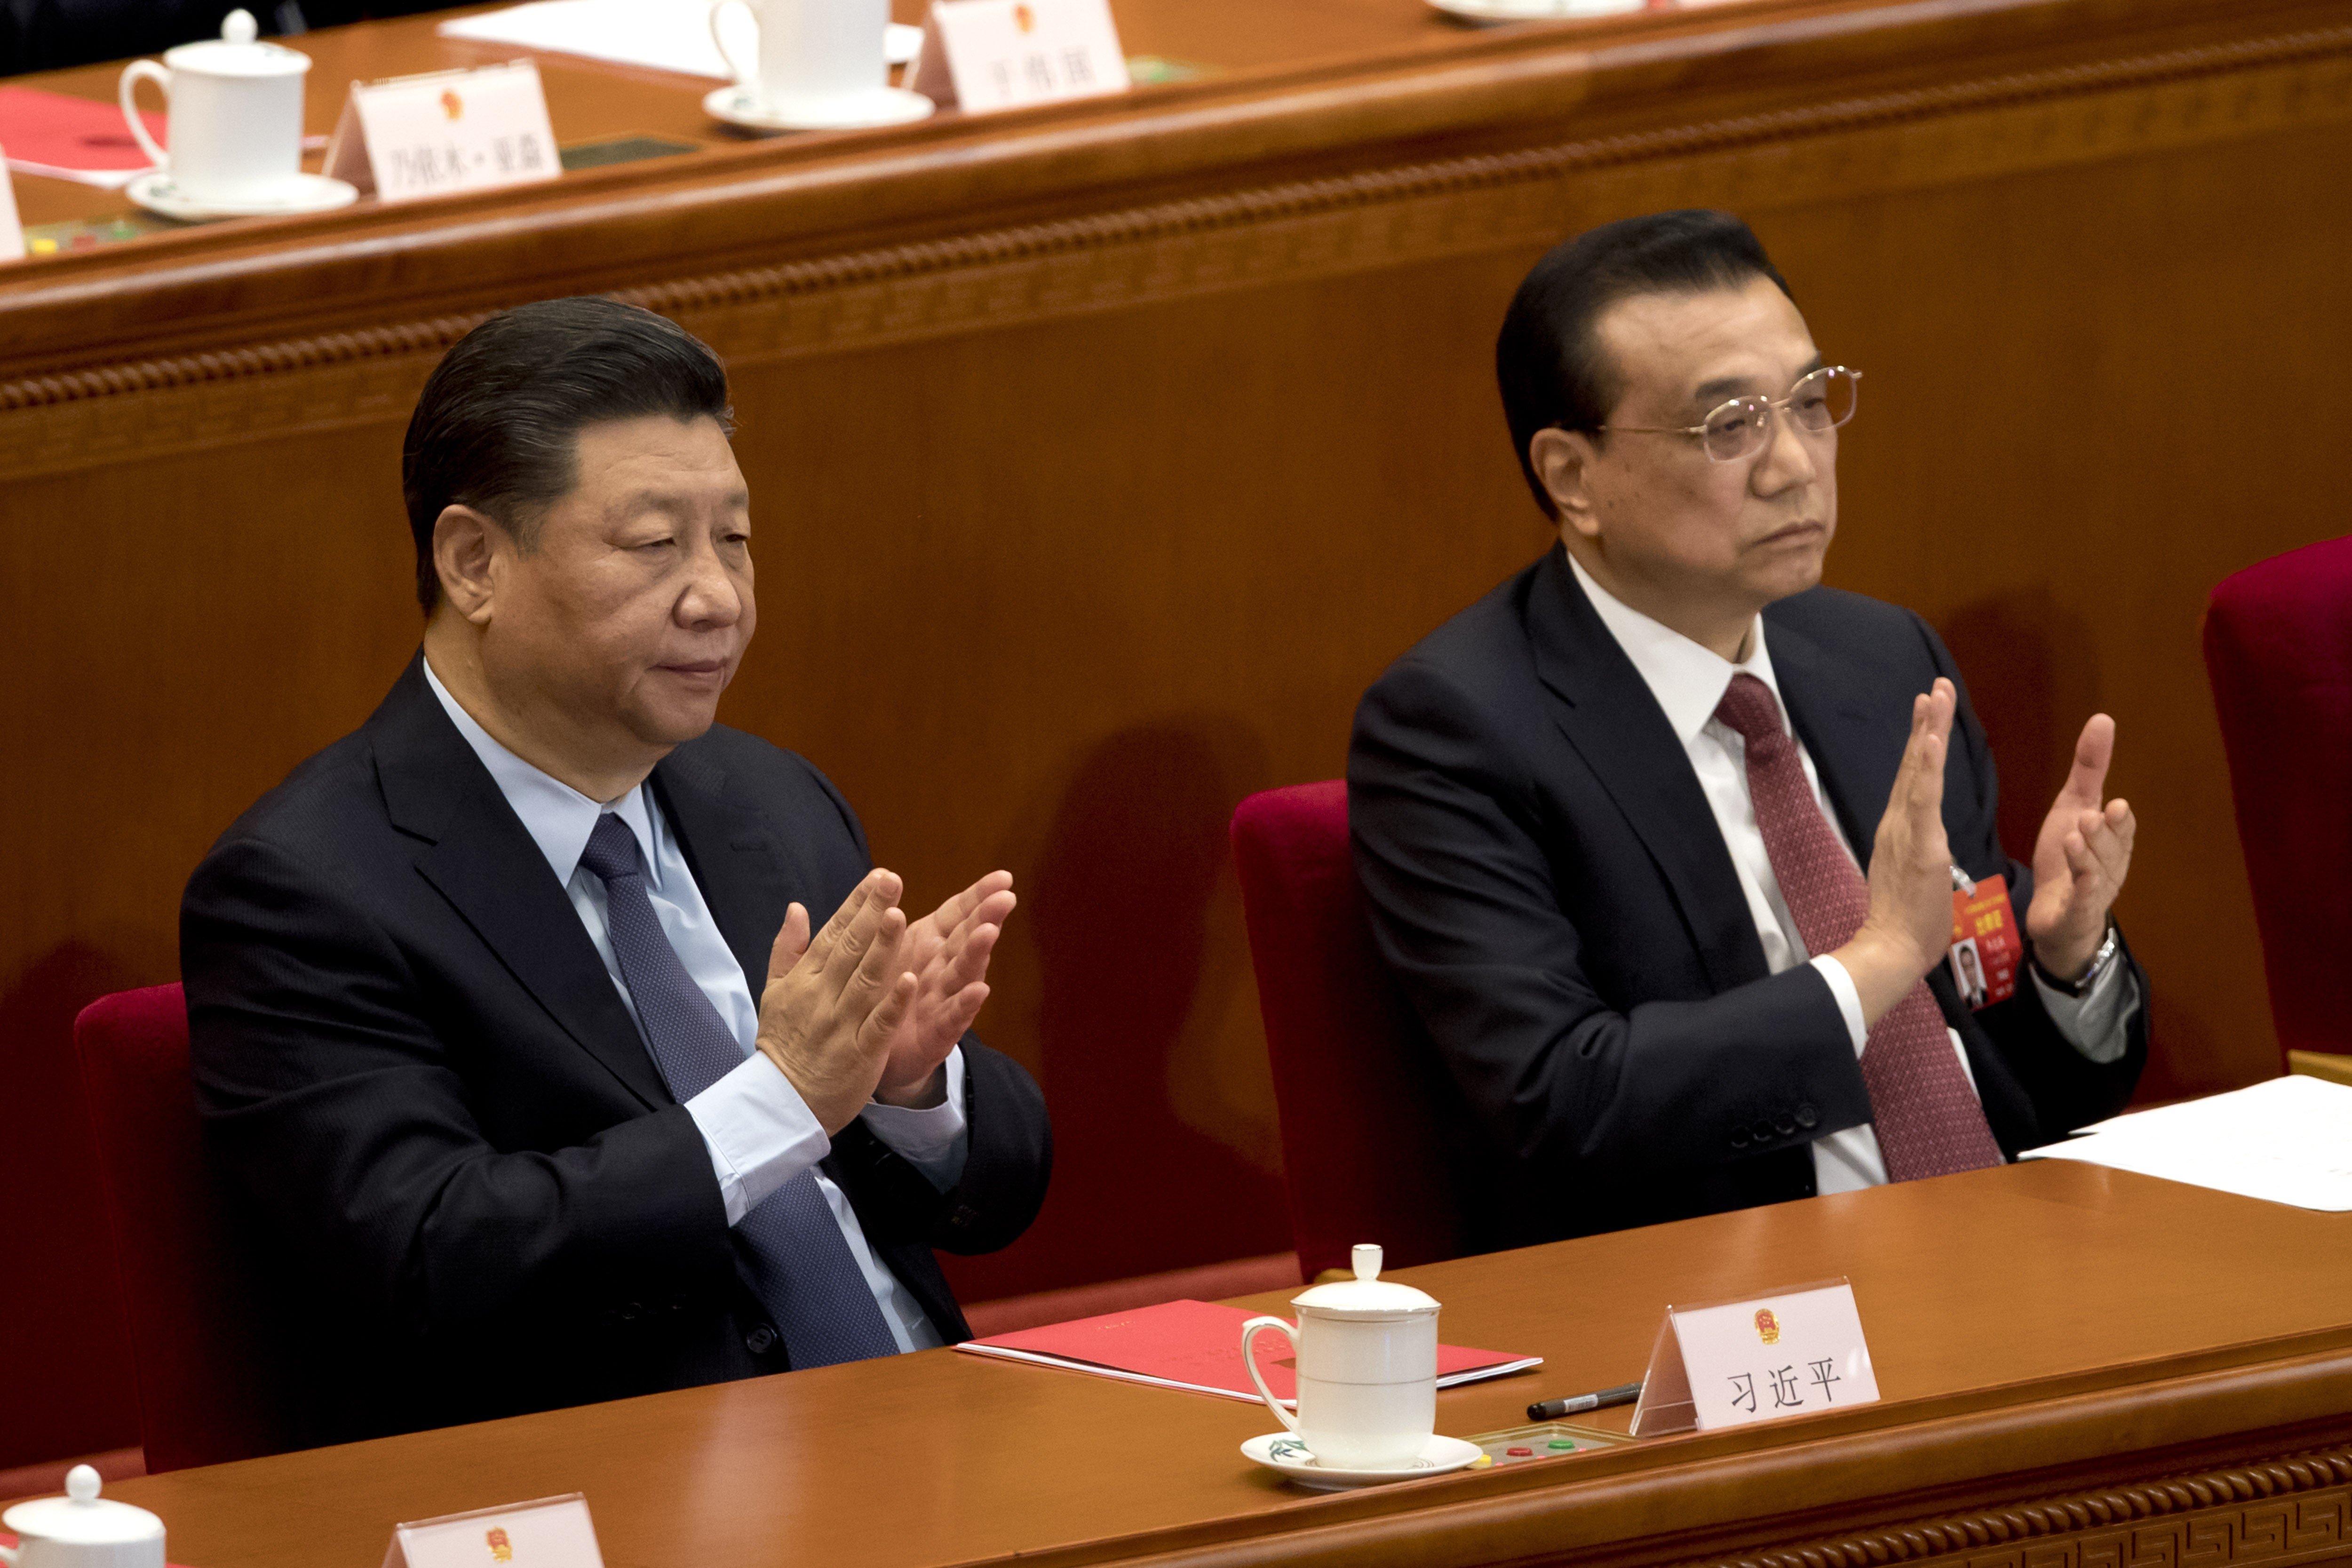 Chinese President Xi Jinping (left) and Premier Li Keqiang applaud during the closing session of the National People’s Congress in Beijing on Friday. Photo: AP